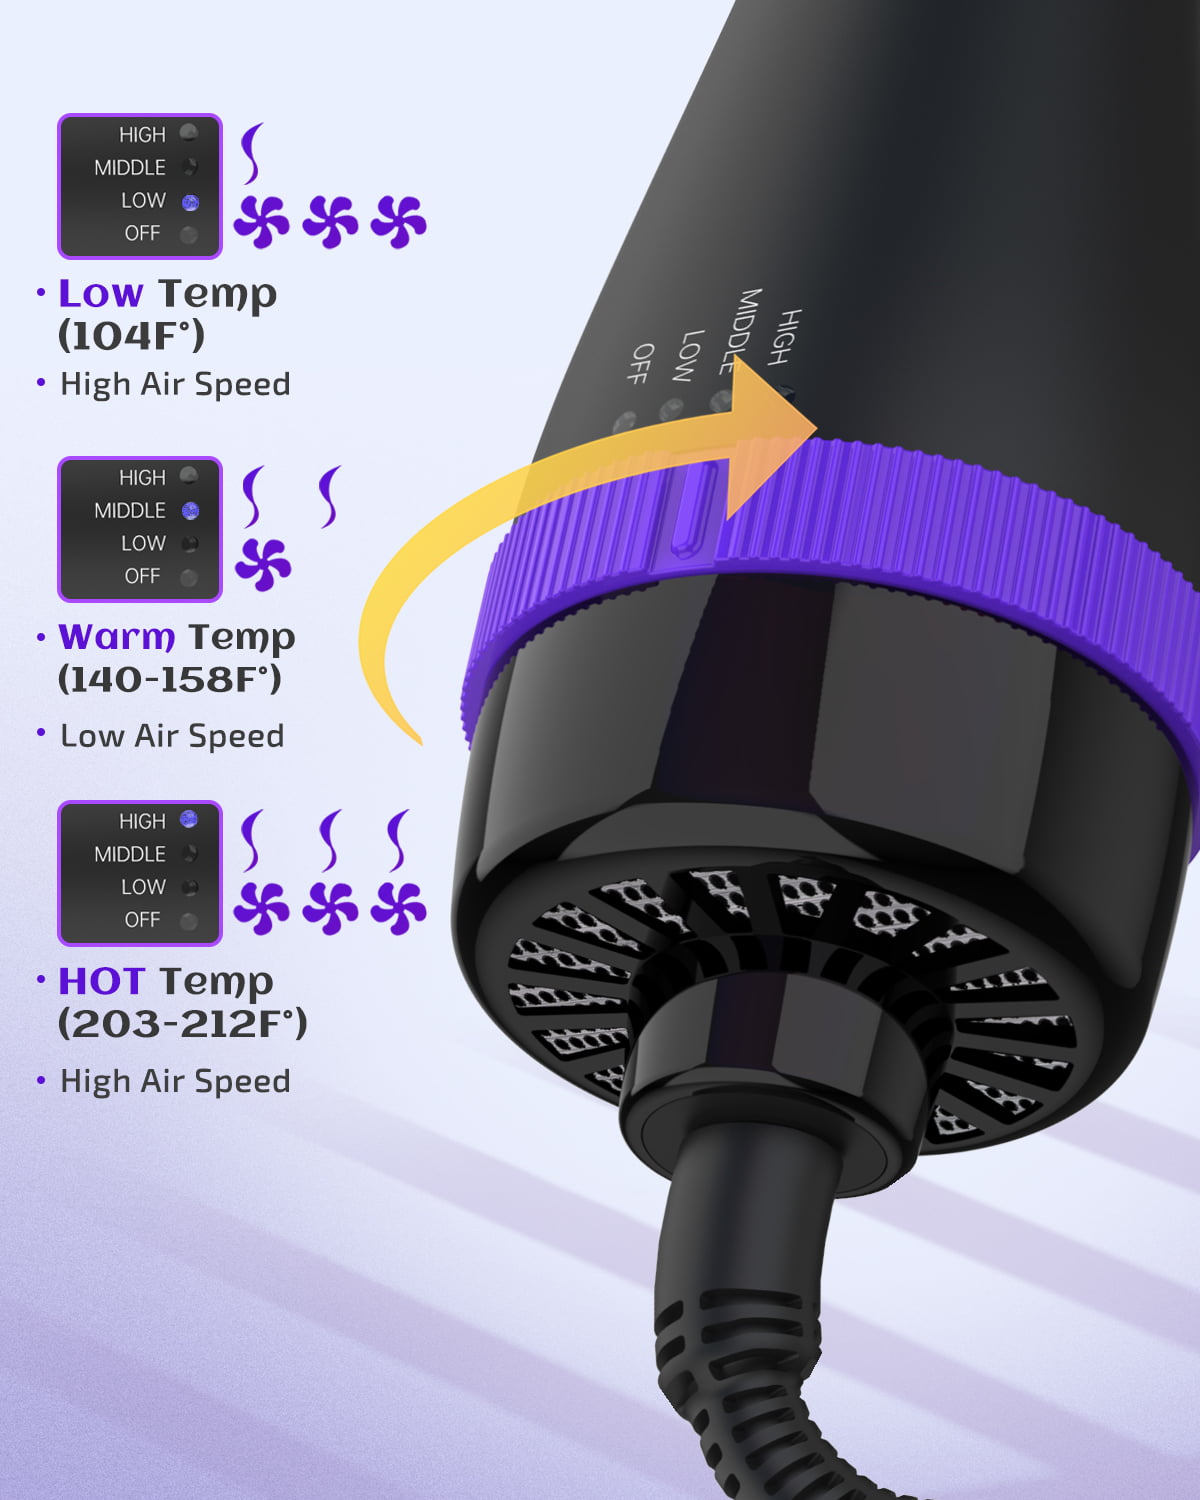 7 in 1 Hair Dryer Brush, 110,000 RPM High Speed Ionic Hair Dryer with  Diffuser, Magic Twist Air Style, Hair Straightener Brush, Air Curling Iron,  3 Temps & 3 Speeds Hair Dryer, Christm 